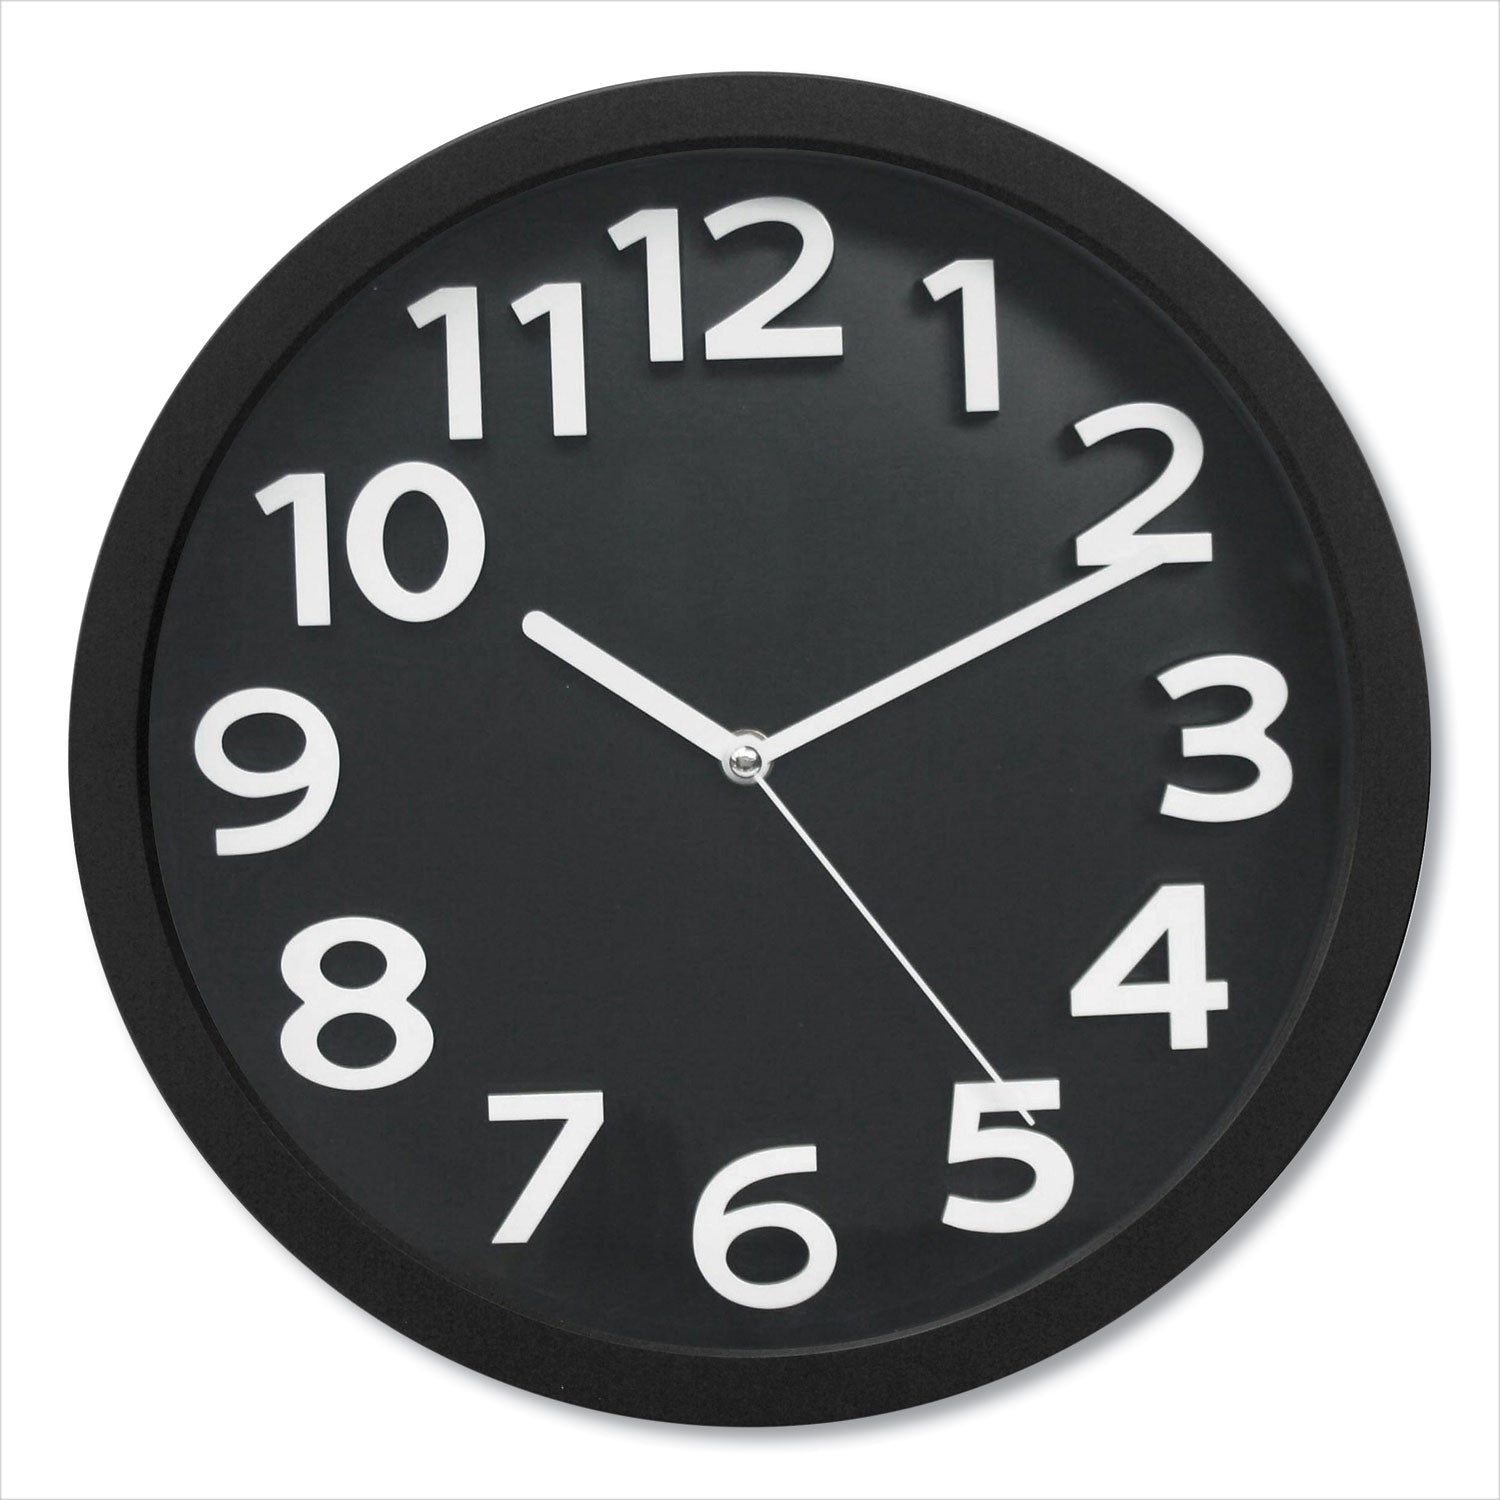 wall-clock-with-raised-numerals-and-silent-sweep-dial-13-overall-diameter-black-case-black-face-1-aa-sold-separately_vlutc62127b - 1